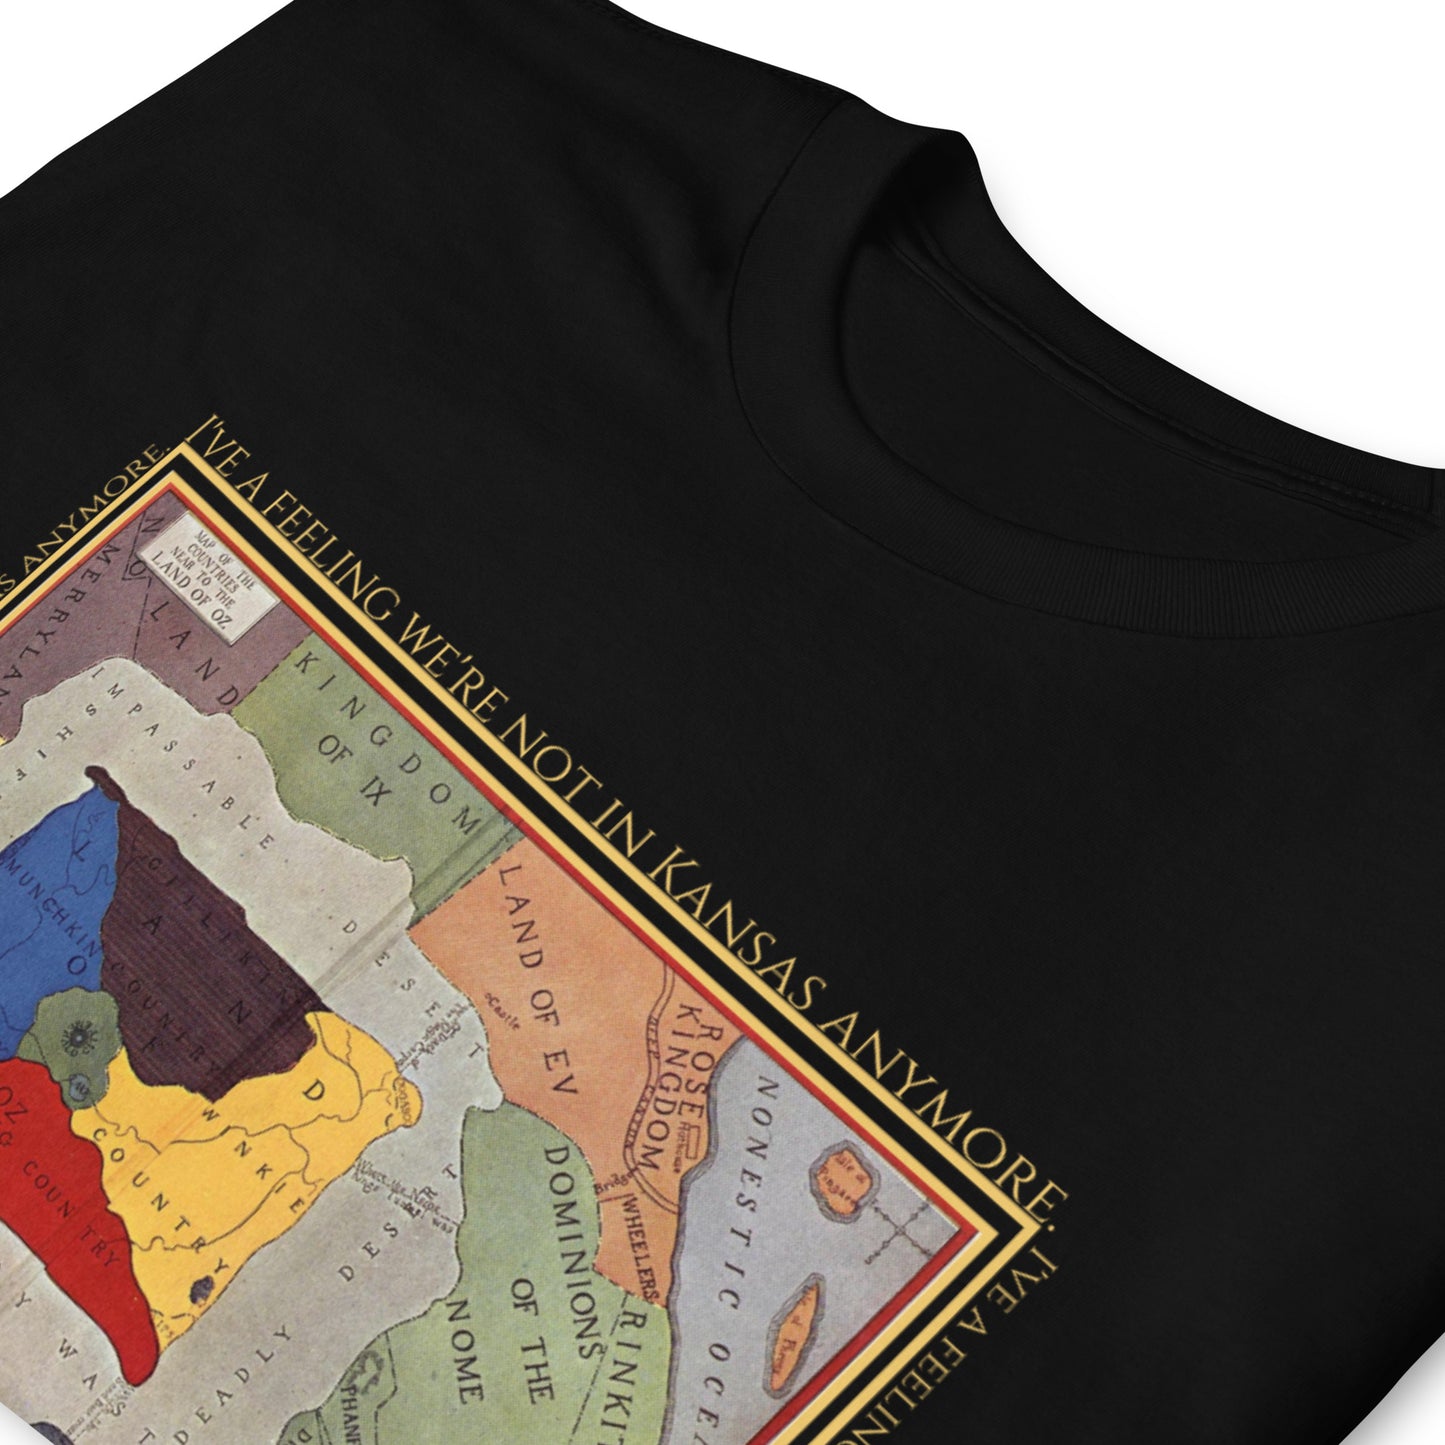 I Have a Feeling We Are Not in Kansas Anymore Short-Sleeve Unisex T-Shirt, Wizard of Oz, Map of Oz